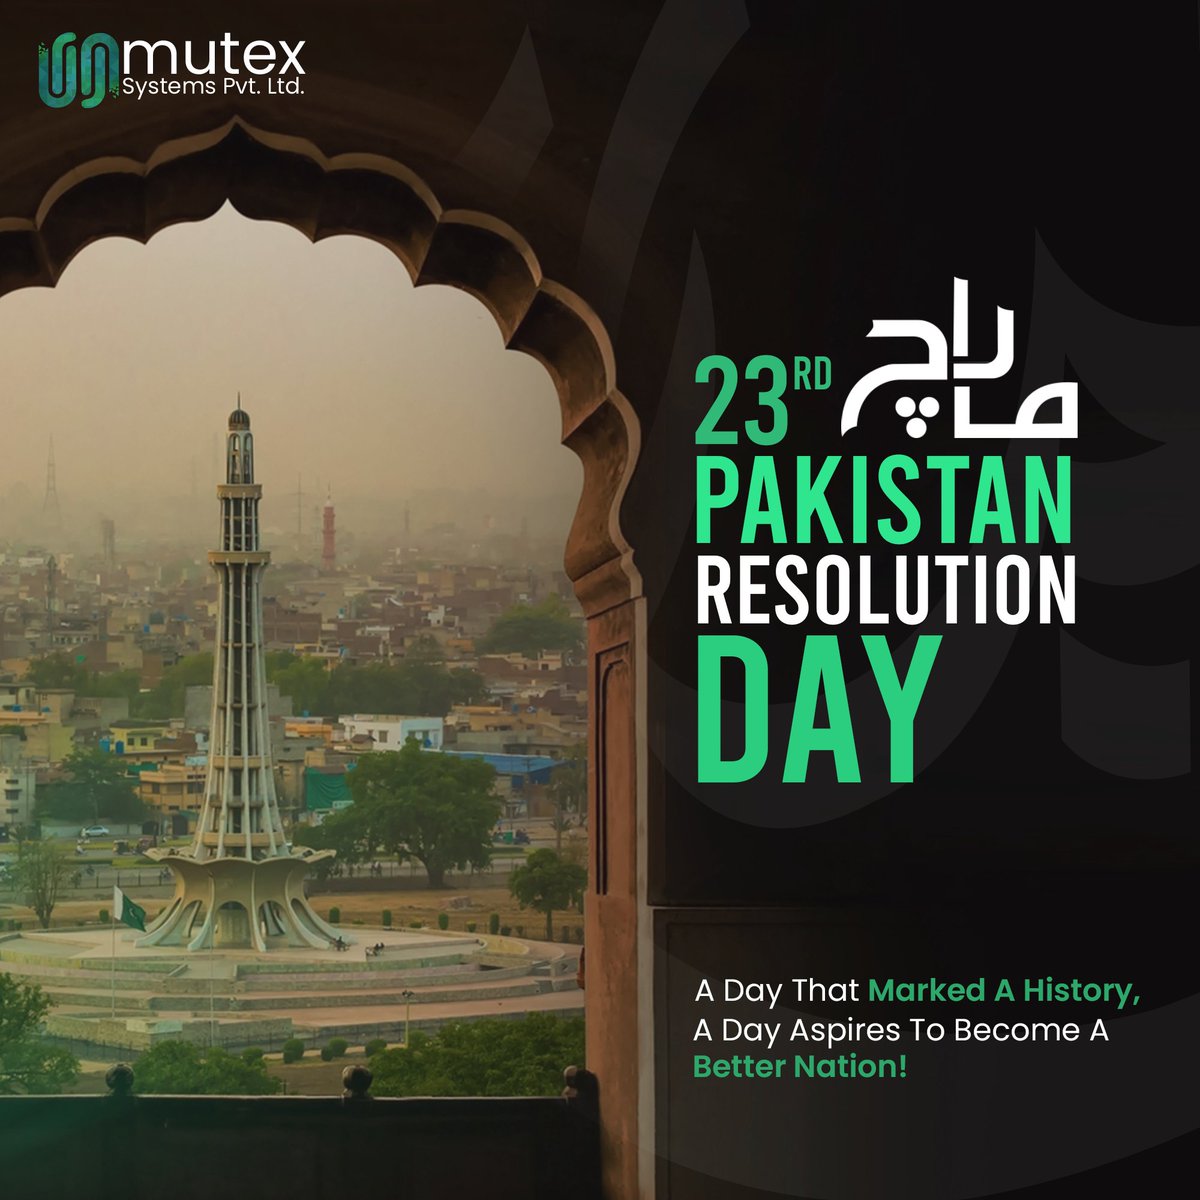 A Day That Marked A History,
A Day Aspires To Become A Better Nation!

Happy Pakistan Resolution Day to all!

#23rdMarch #PakistanResolutionDay #PakistanDay #ResolutionDay #OneNationOneDestiny #UnityFaithDiscipline #MutexSystemsPvtLtd #pakistan